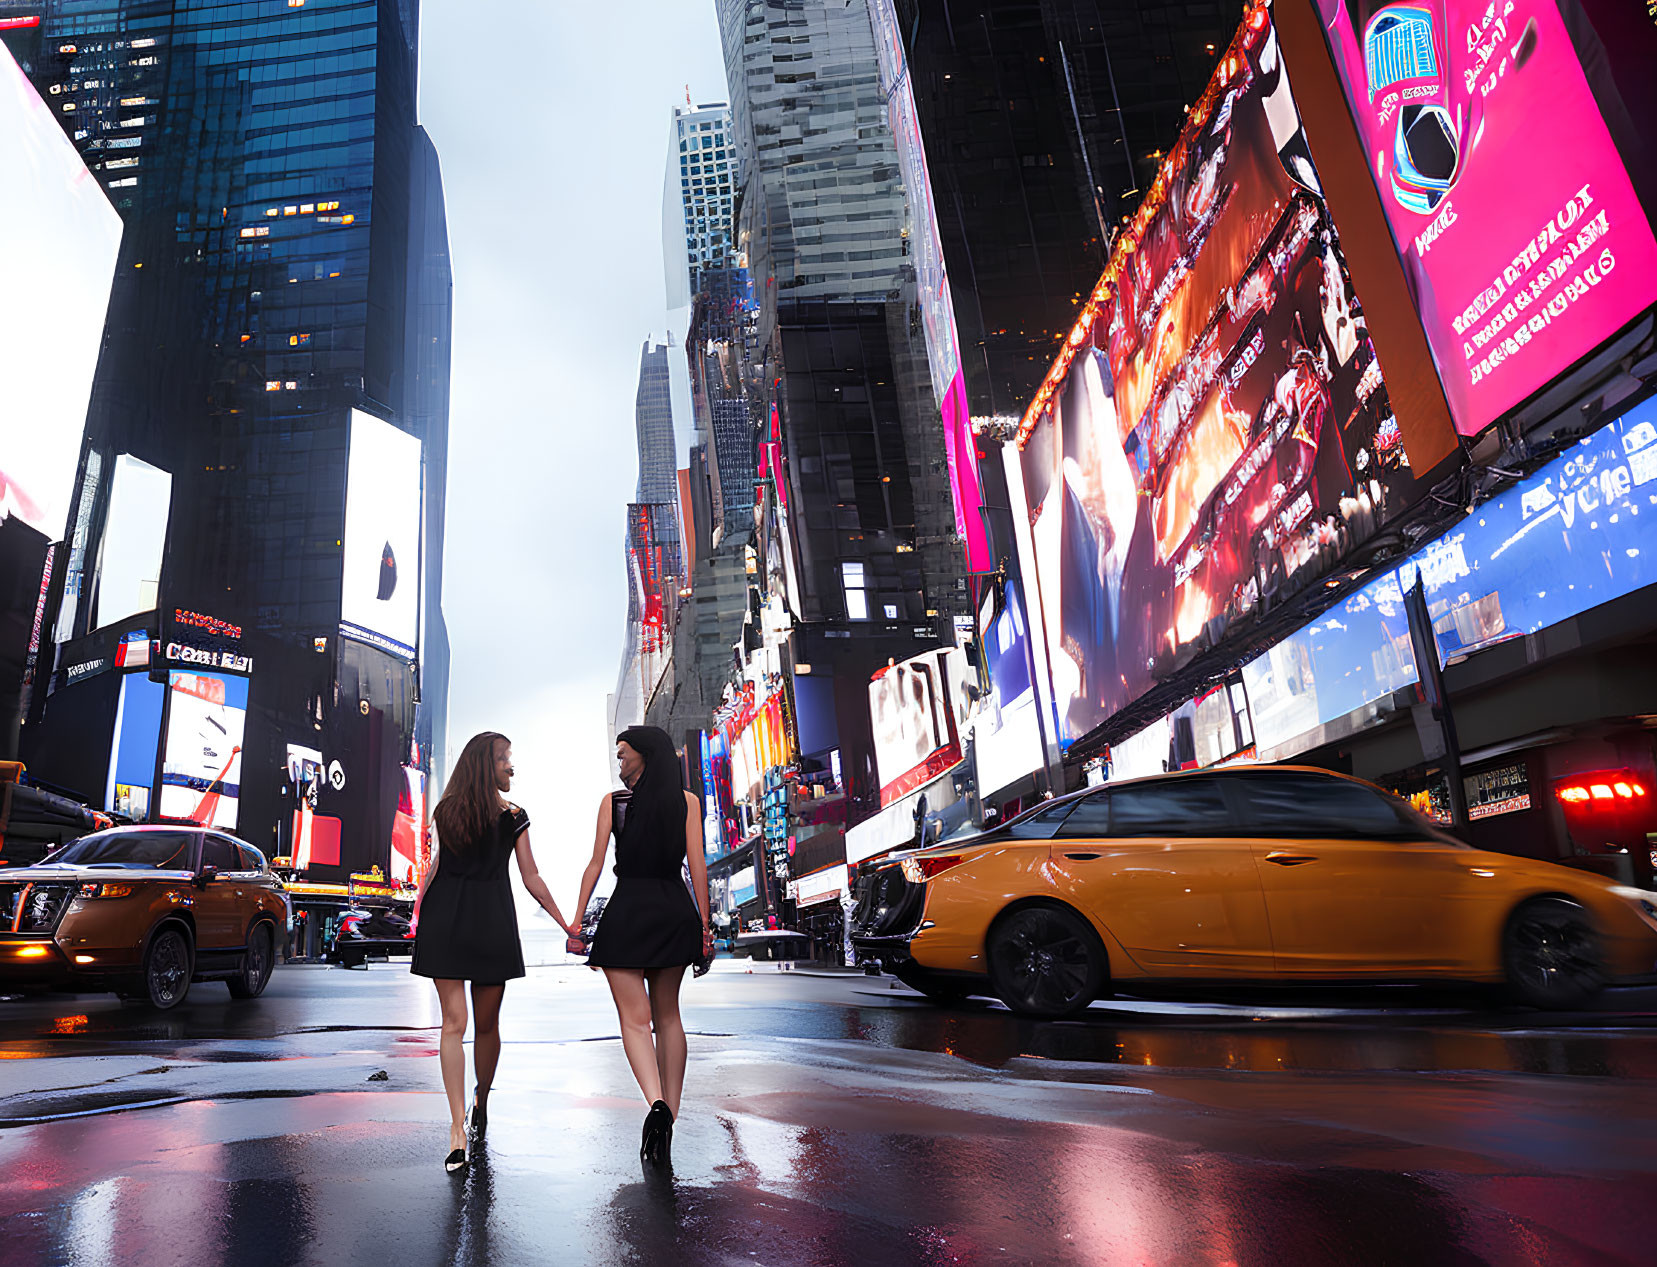 Busy Times Square with Two Women Walking at Night